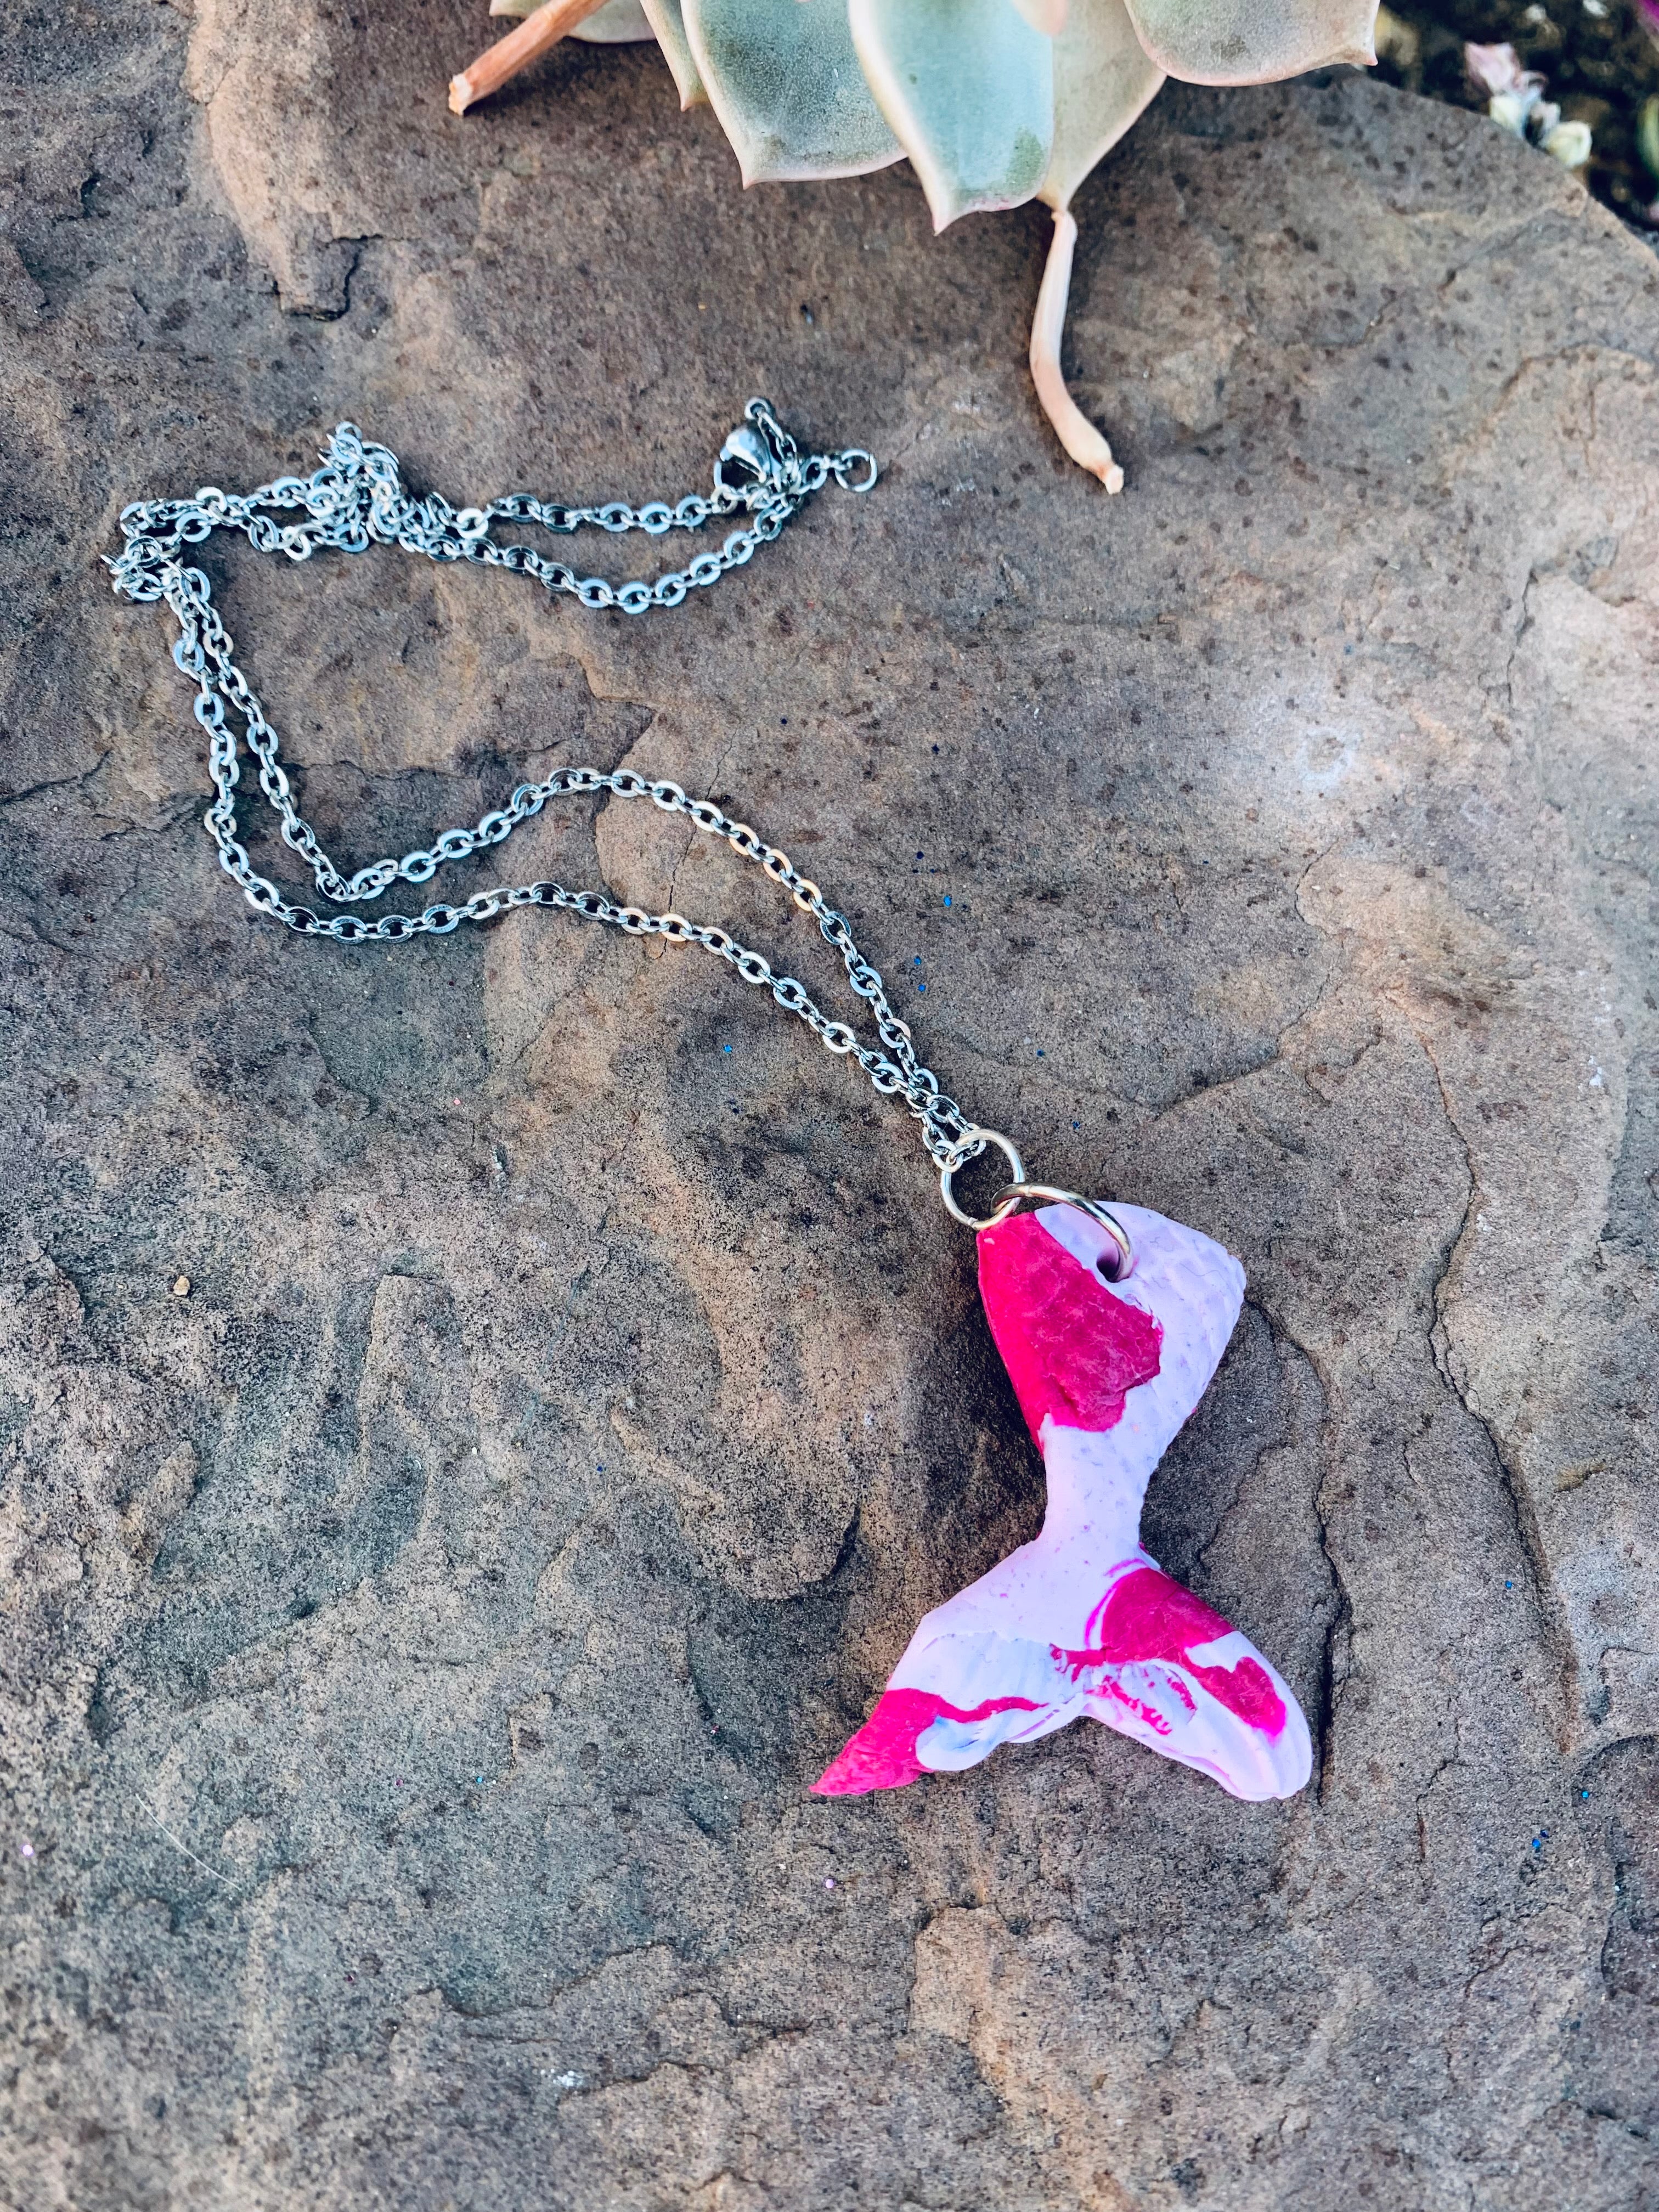 Clay Mermaid tail on a Stainless Steel Chain